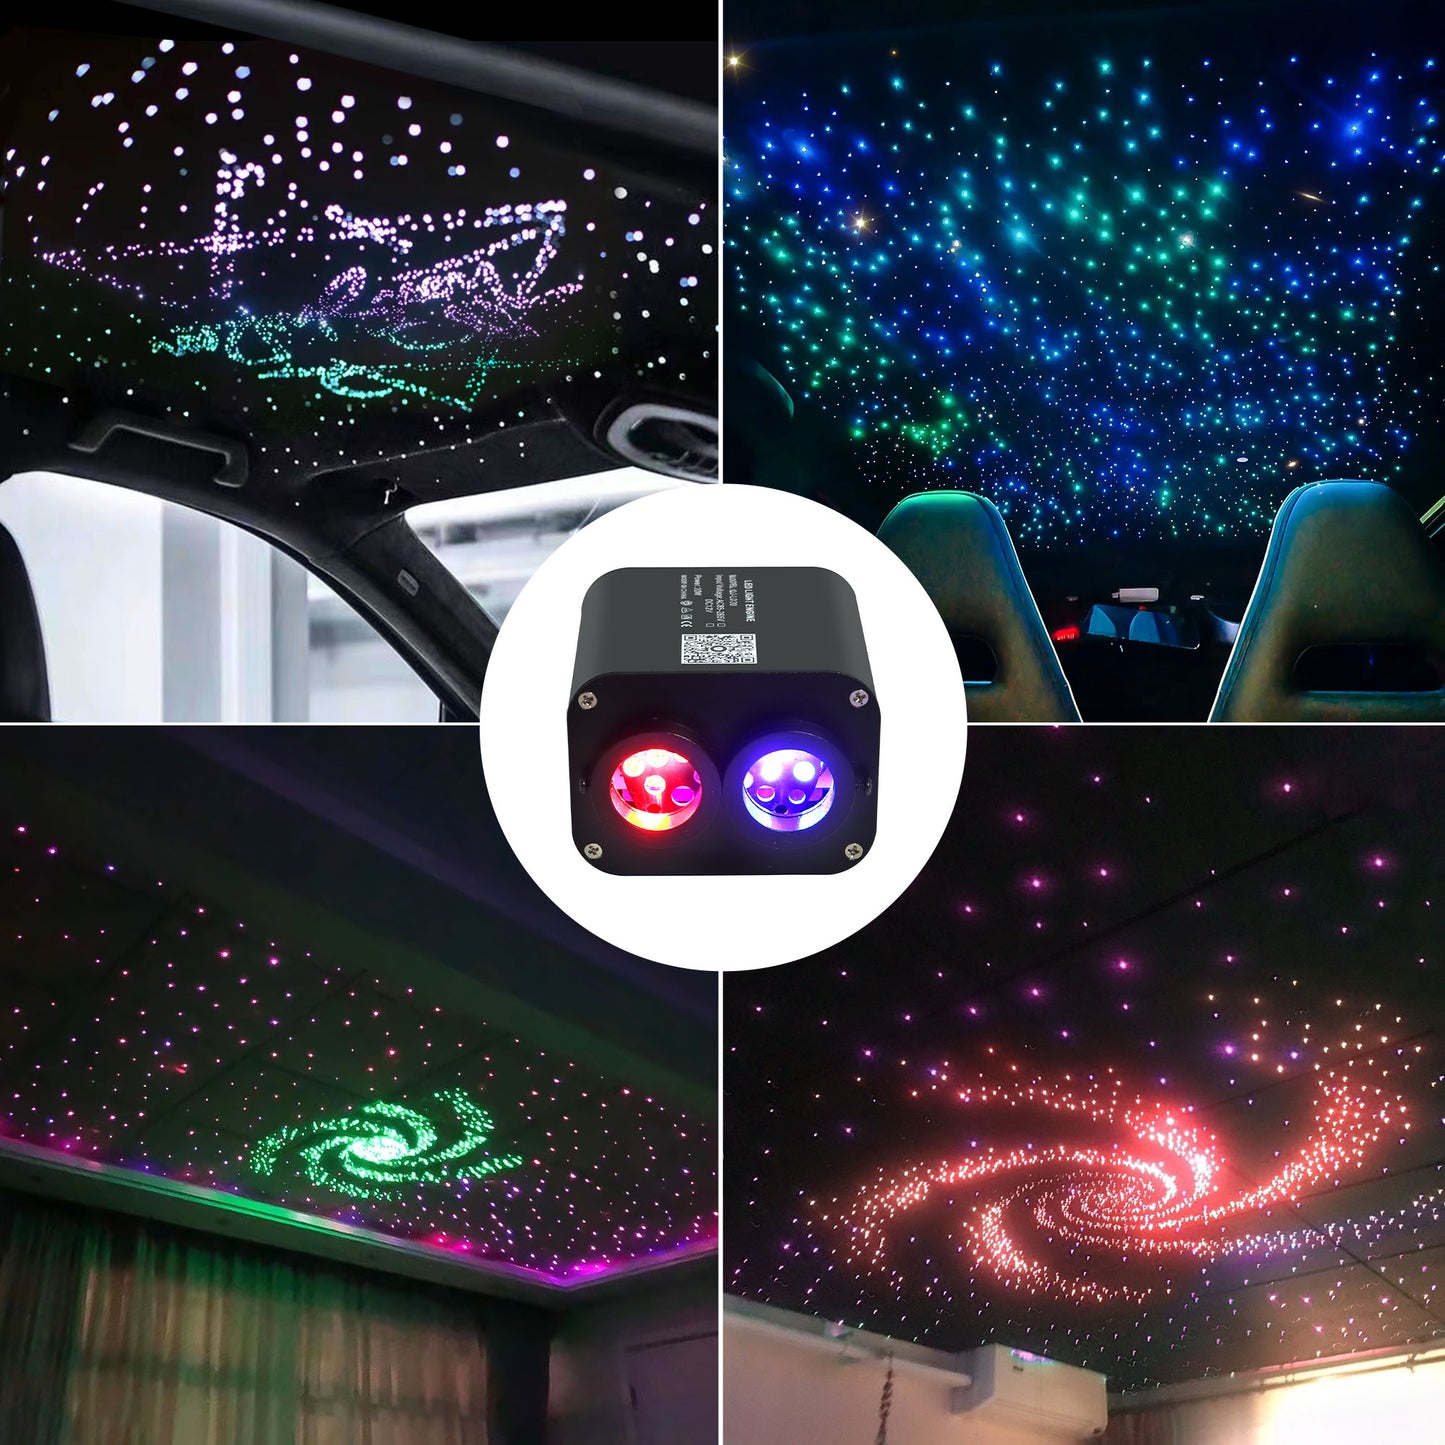 BEESIDY 20W Twinkle Dual Color Fiber Optic Lighting Kit, Starlight Headliner Kit for Car/Home Use,Star Roof Lights with Bluetooth App/Remote Control